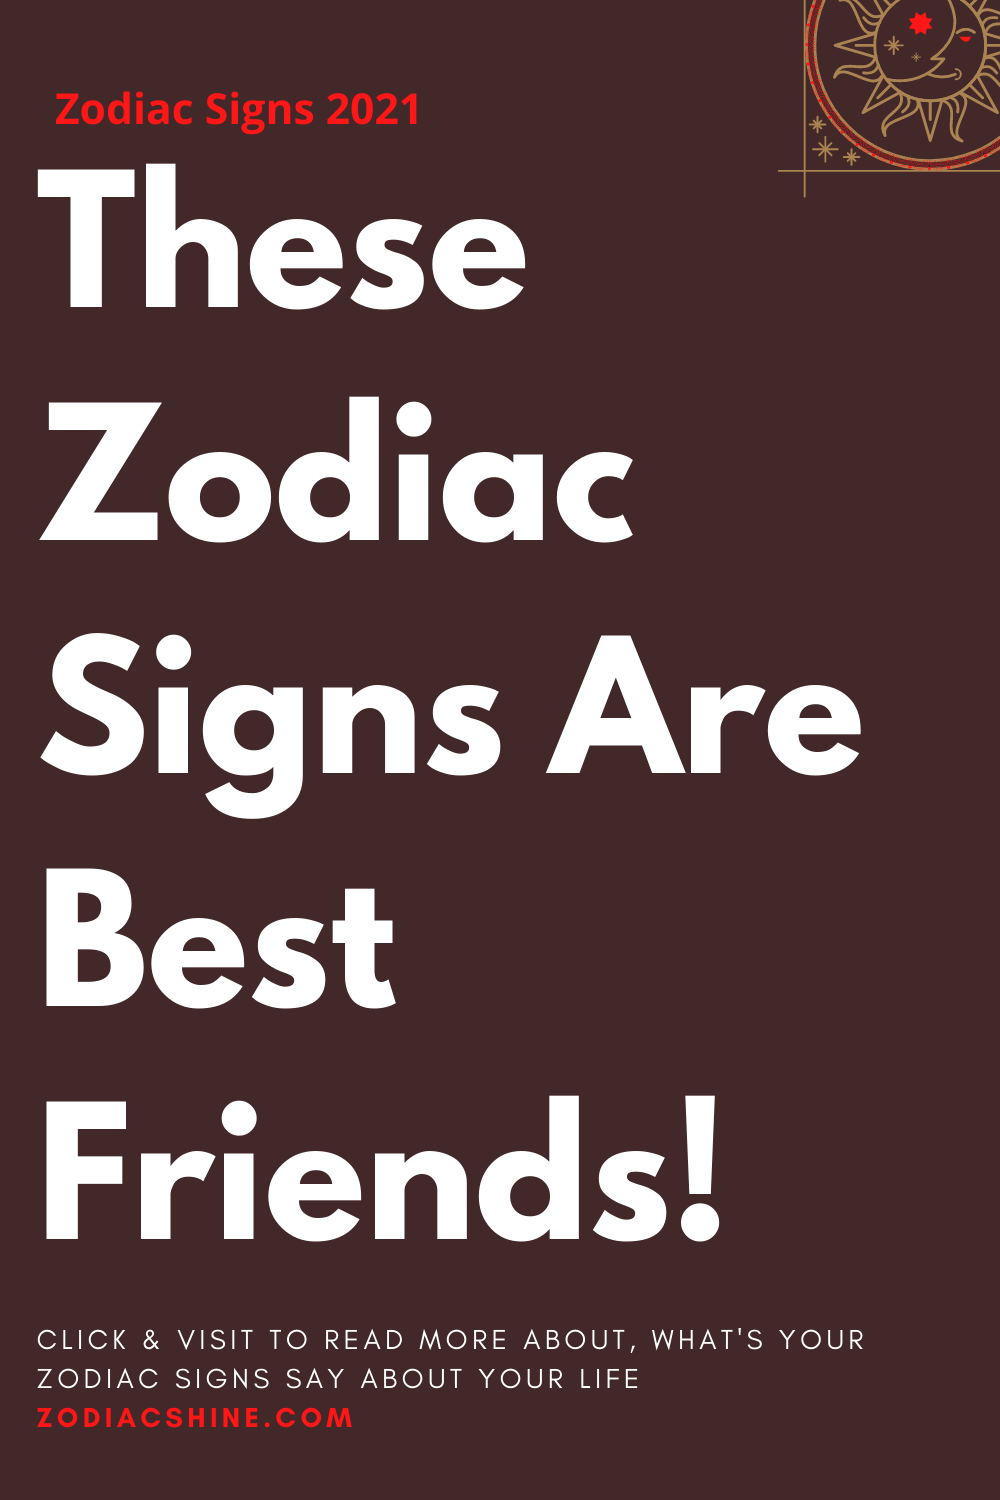 These Zodiac Signs Are Best Friends!